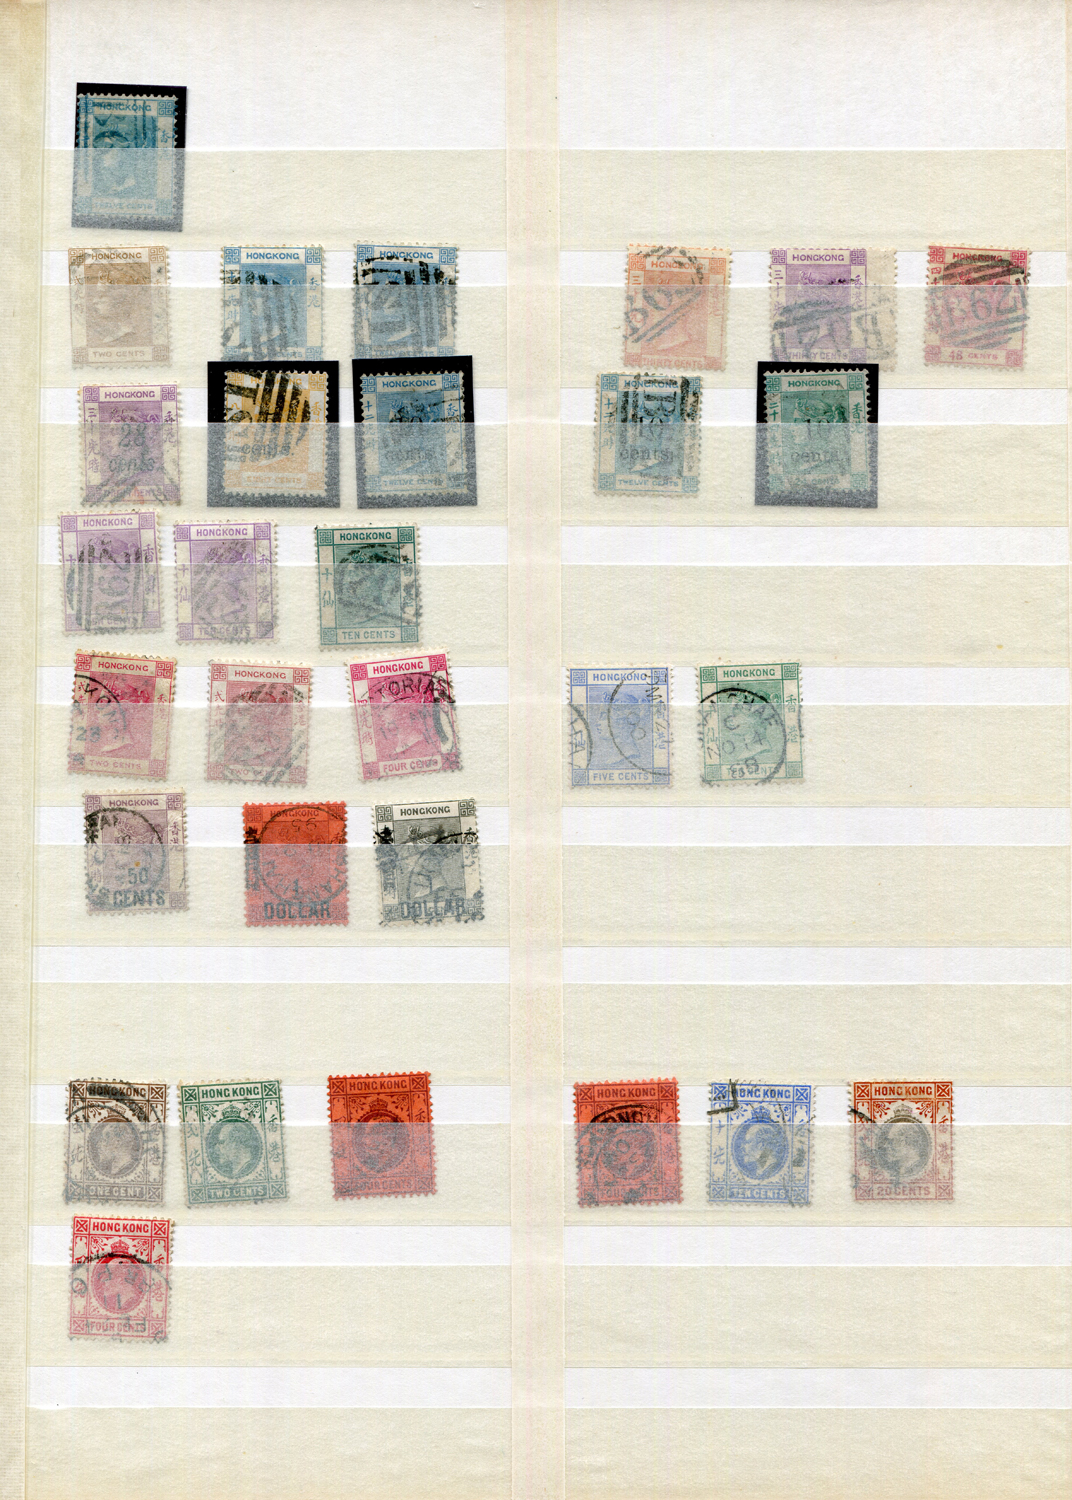 A Hong Kong stamp album, used, including 1862 12 cent, 1880 surcharges, 1949 UPU 80 cent purple with